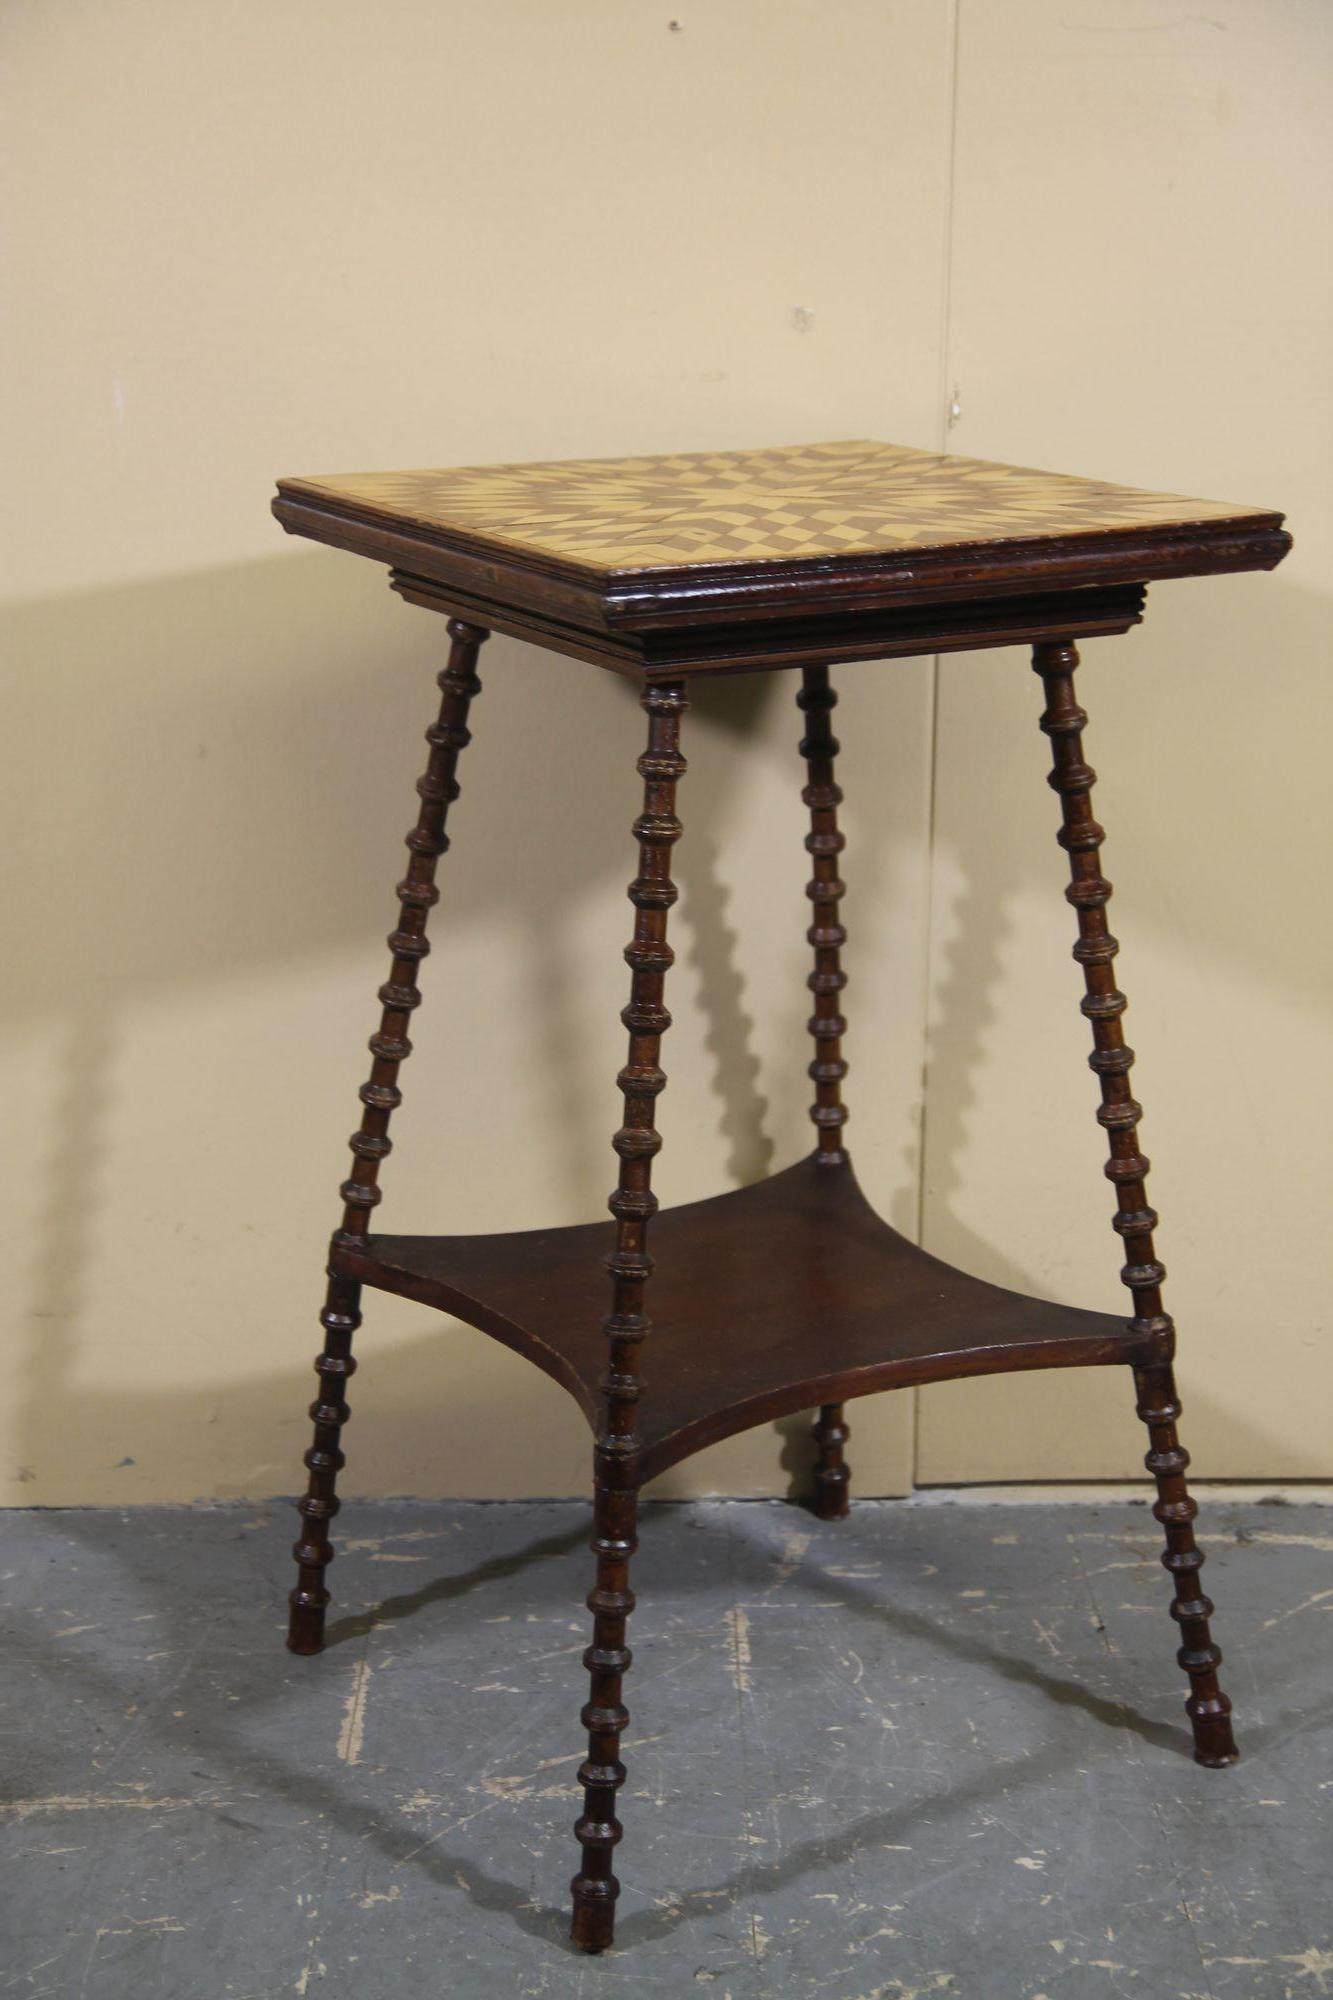 Pleased to offer this great 1940's folk art side table. Legs are vintage thread spools with metal rod running through them for strength. Top is this nice inlay wood pattern.